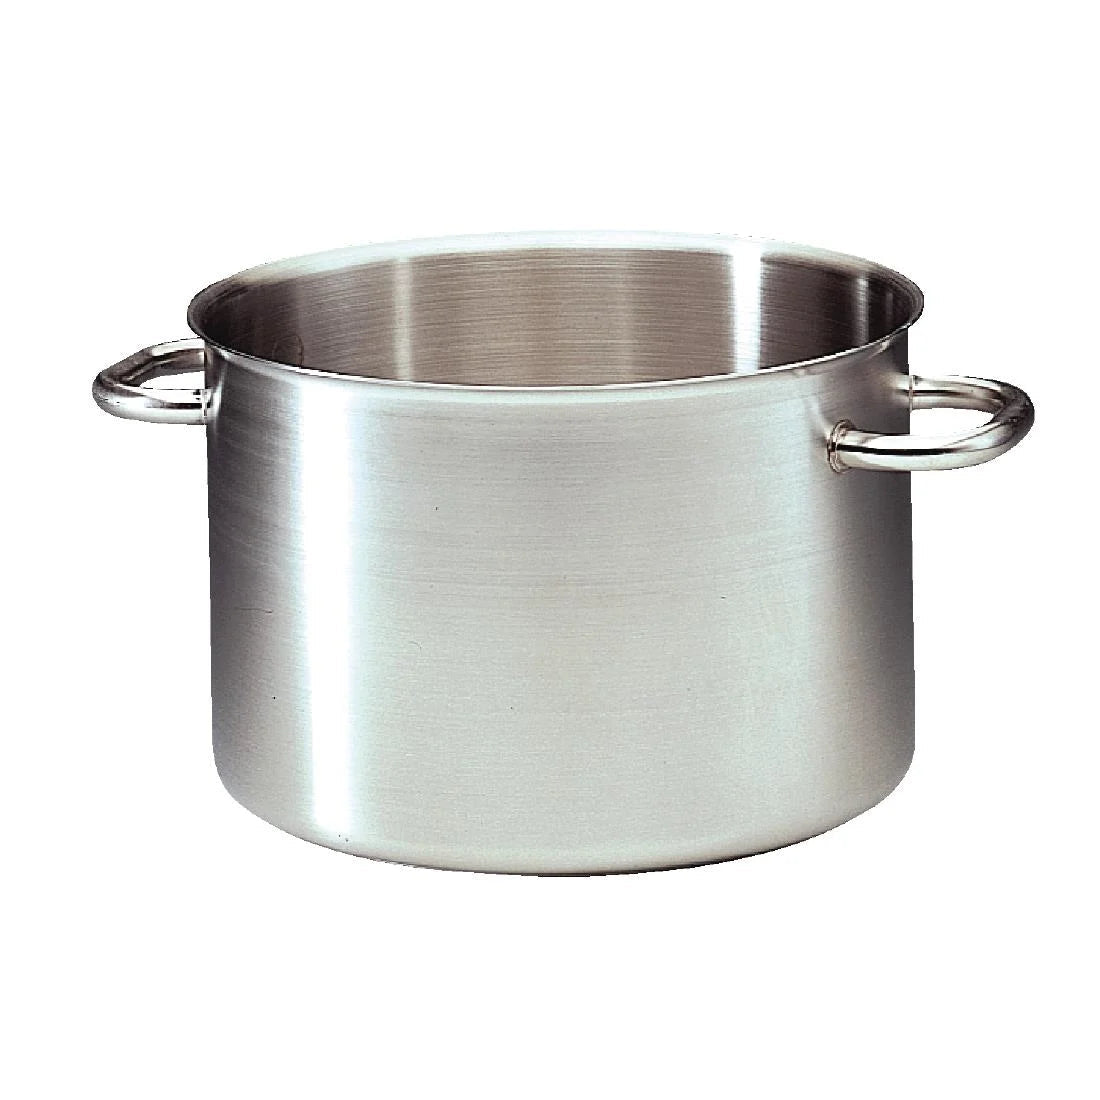 Bourgeat Excellence Boiling Pot 17Ltr JD Catering Equipment Solutions Ltd